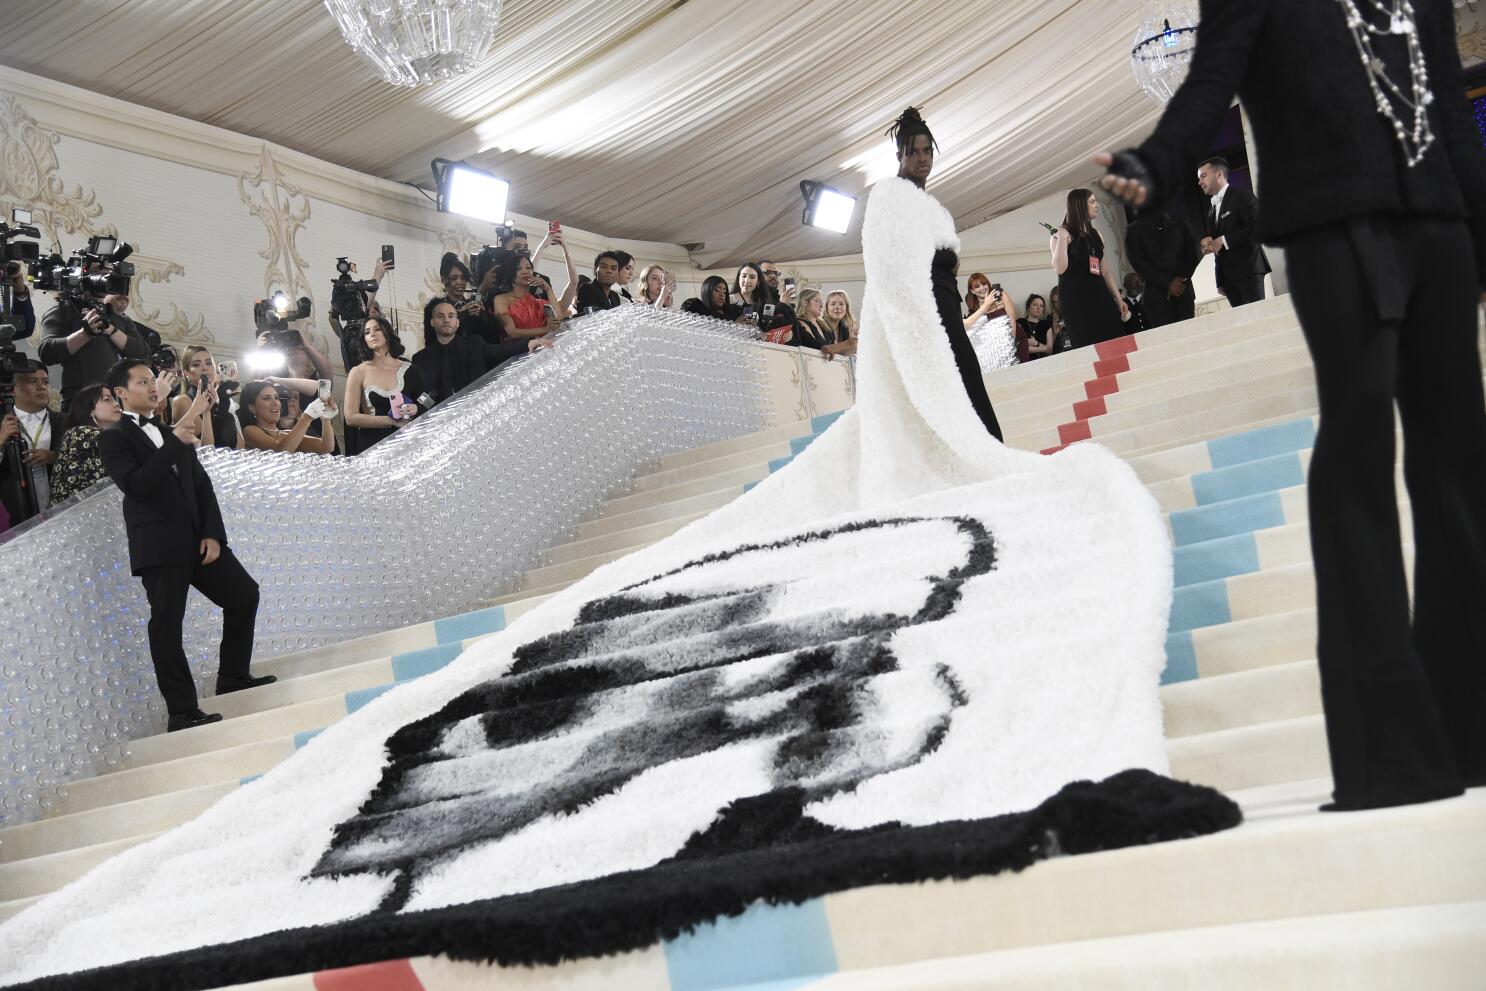 Met Gala 2023: Did These Celebs Shade Karl Lagerfeld With Their Outfits?